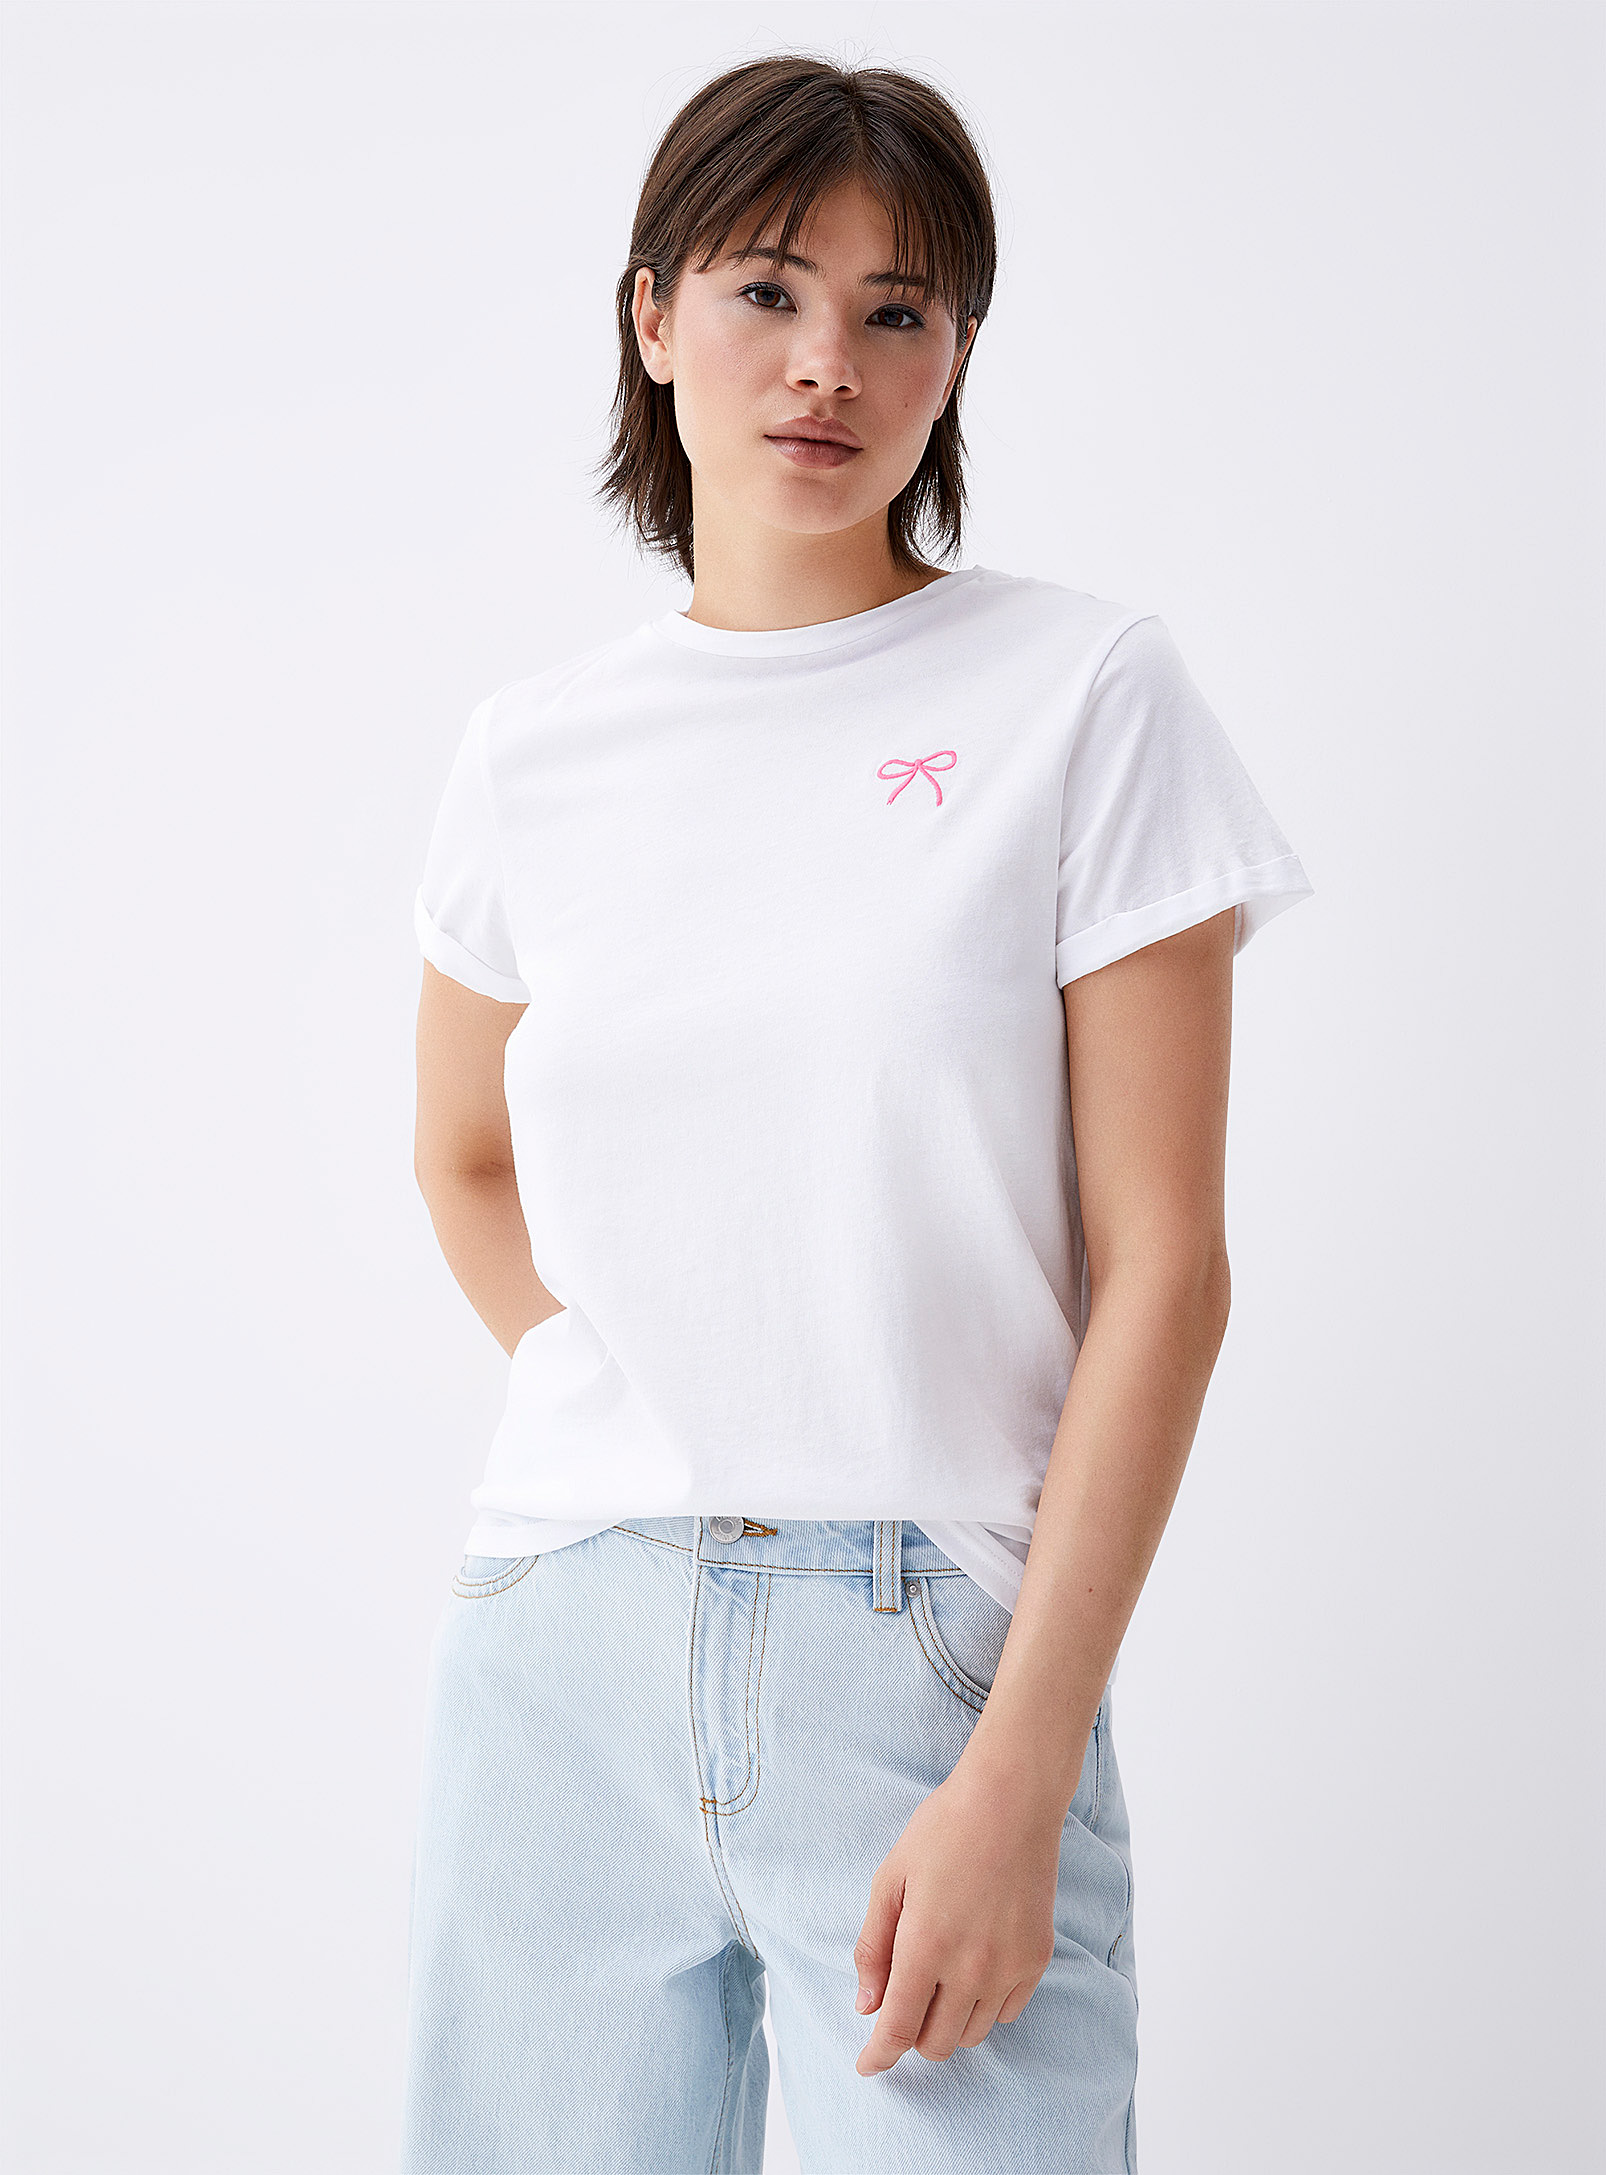 Twik Embroidery Thin Jersey Crew-neck Tee Relaxed Fit In Patterned White